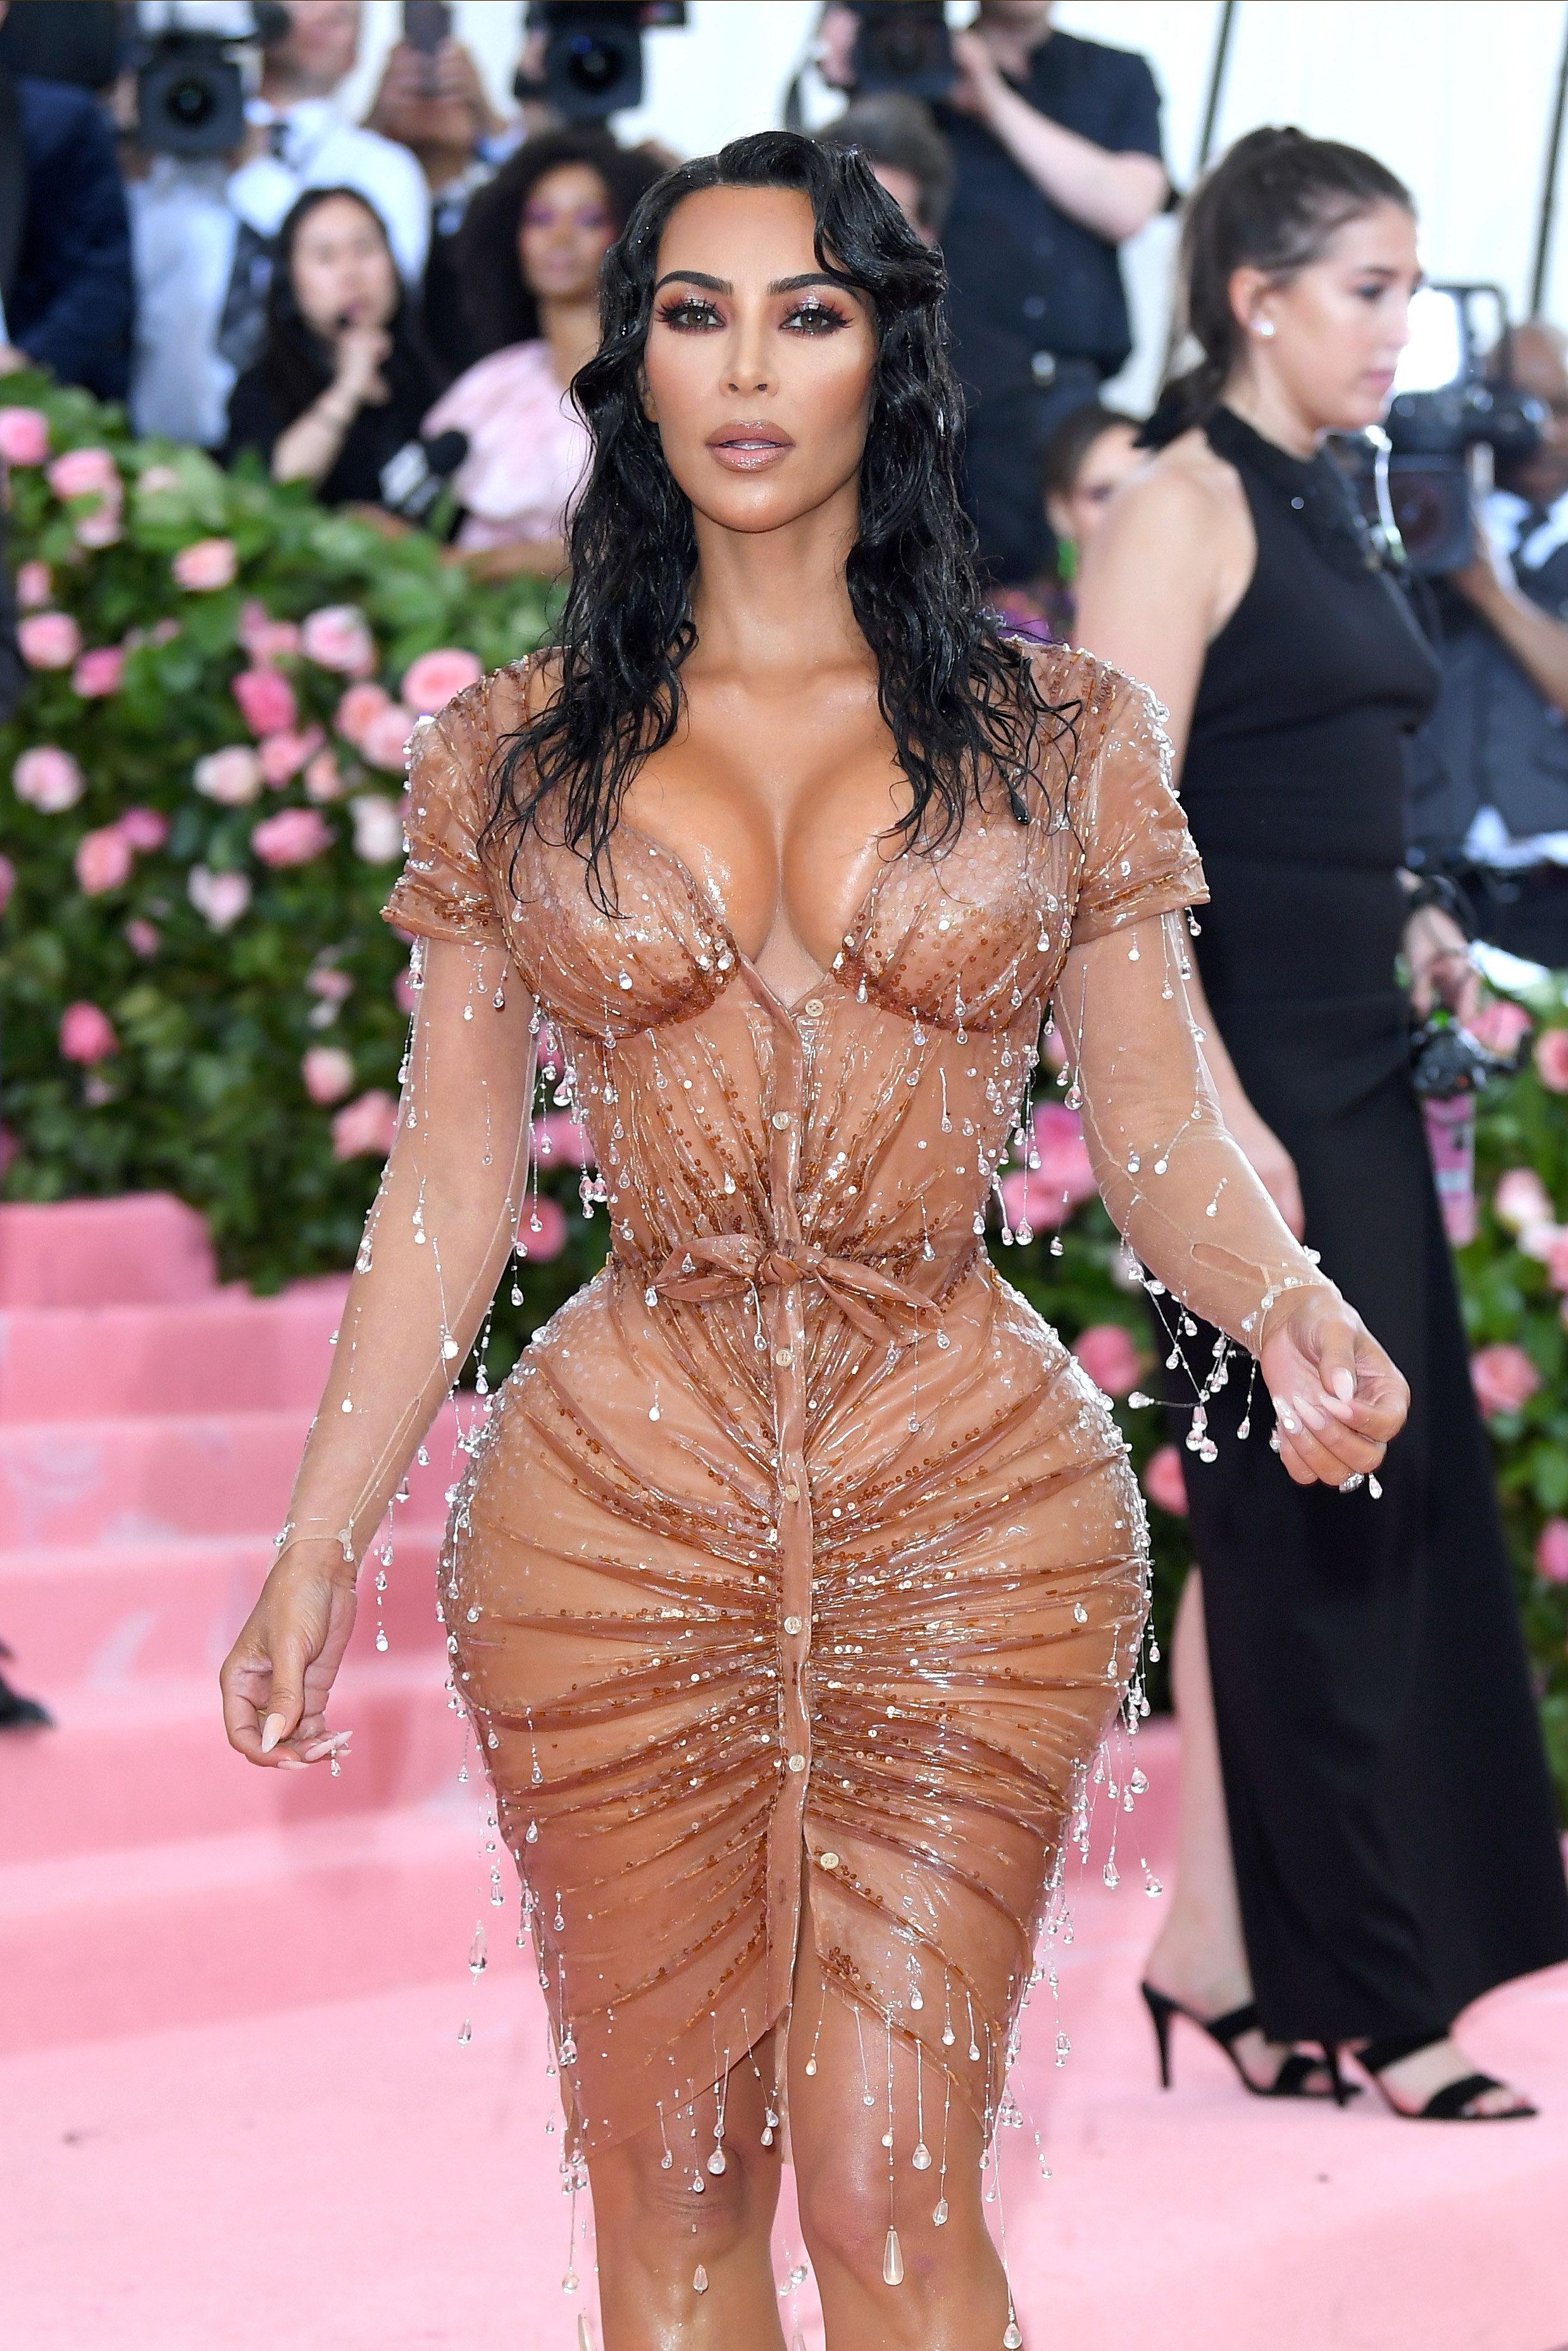 Kim wearing a very tight dress with jewels hanging off it